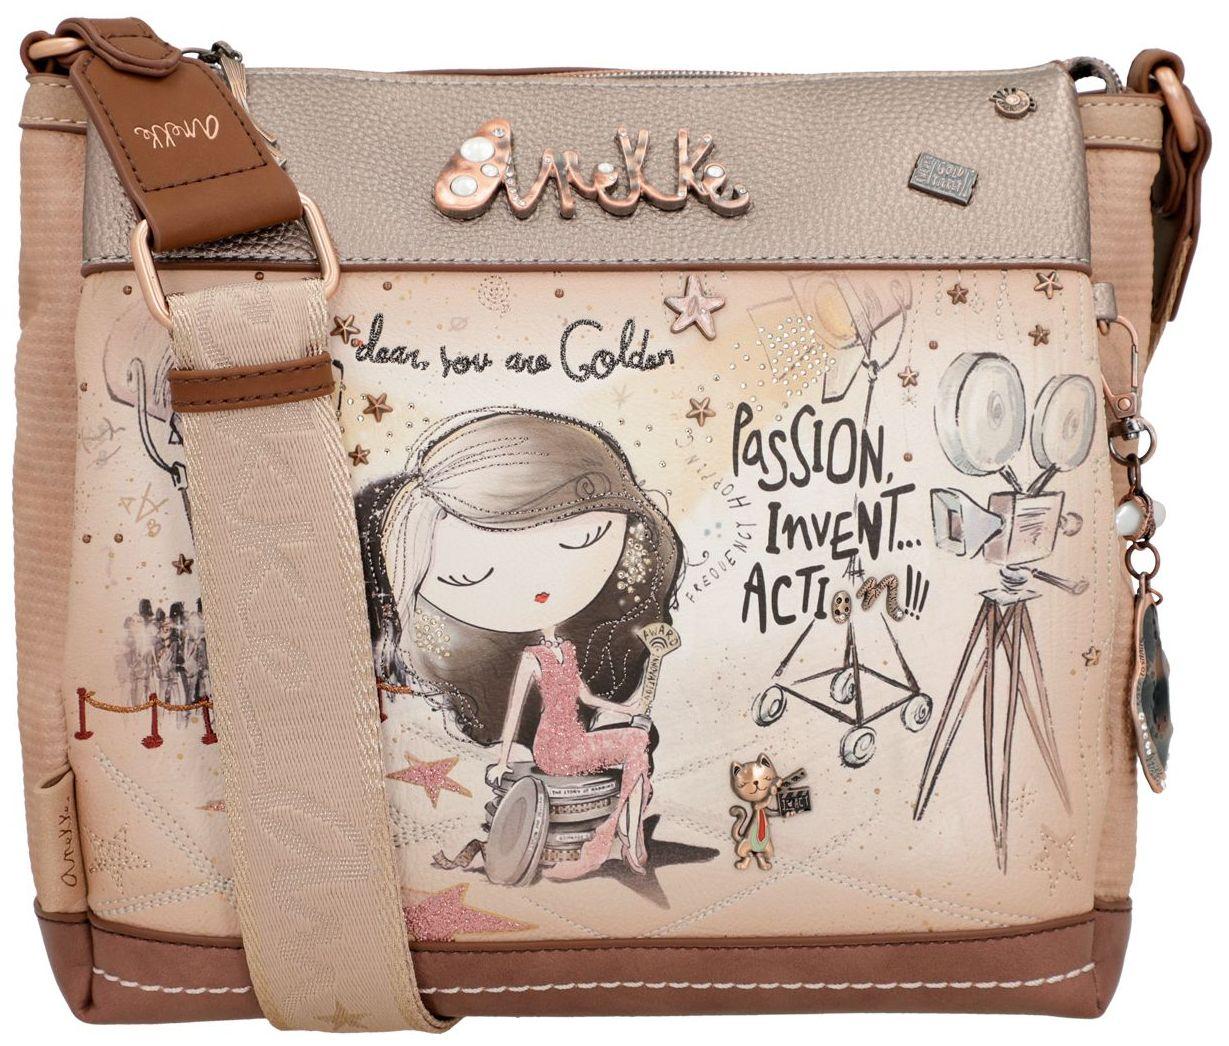 Anekke Hollywood Crossovertasche Glamour Metallic